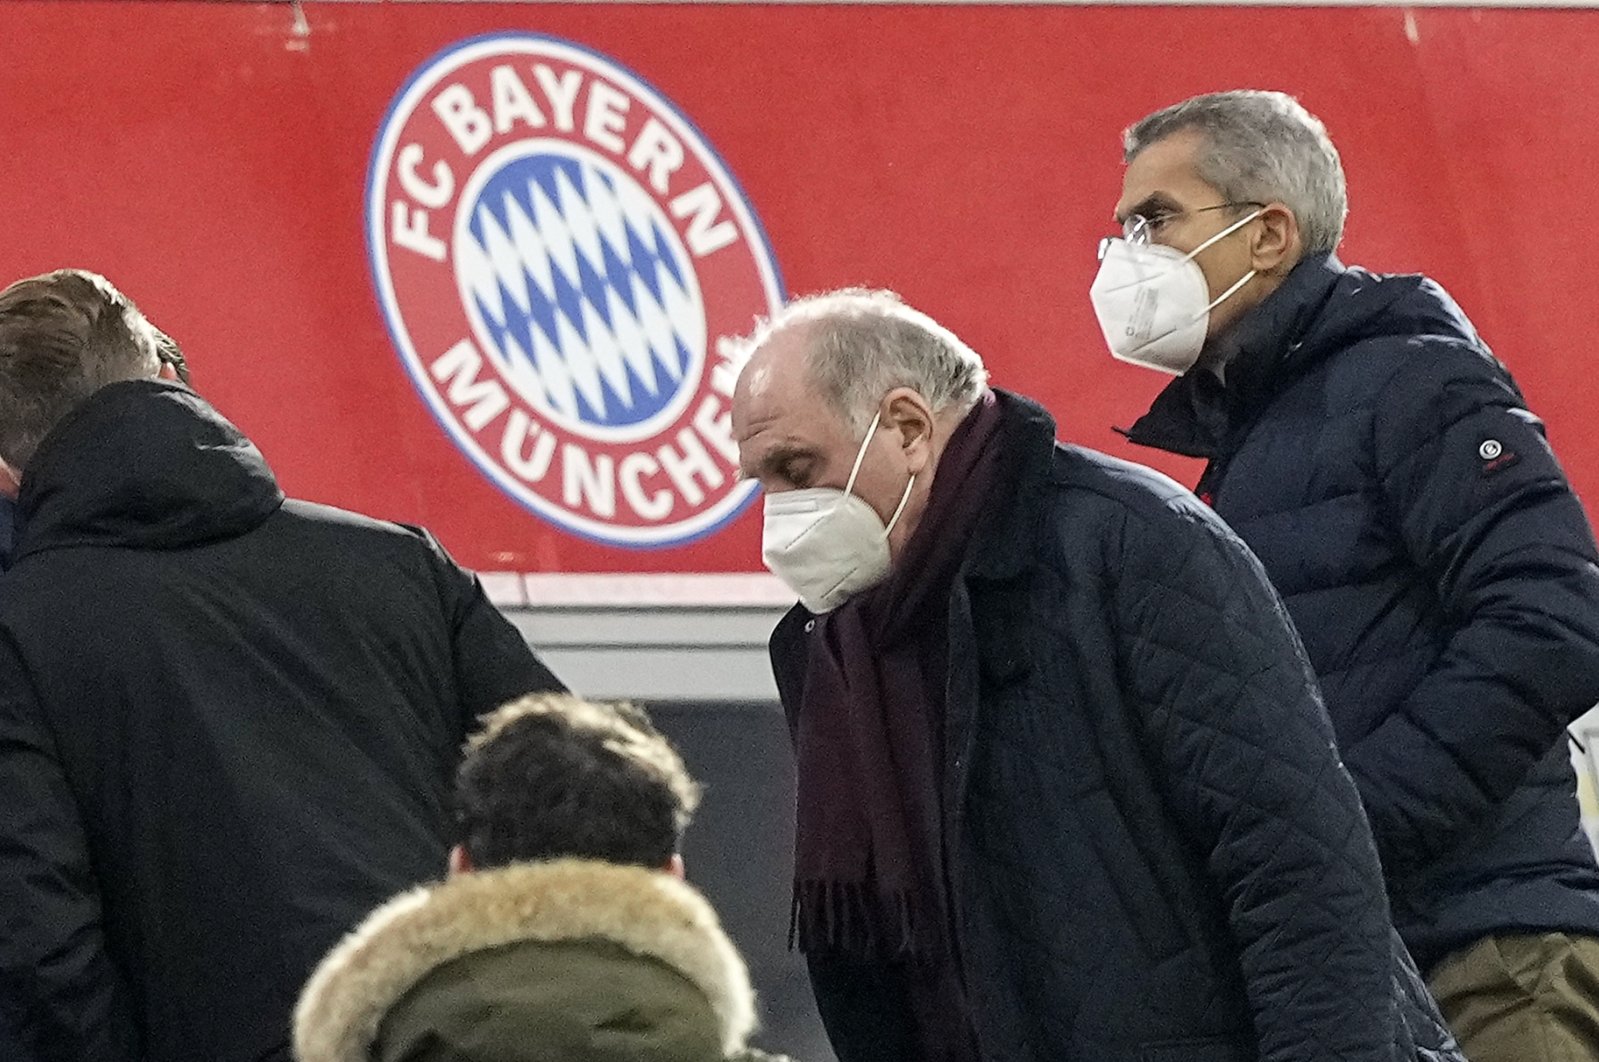 Former Bayern Munich President Uli Hoeness (C) leaves his place with a face mask during a Bundesliga match against Arminia Bielefeld, Munich, Germany, Nov. 27, 2021. (AP Photo)